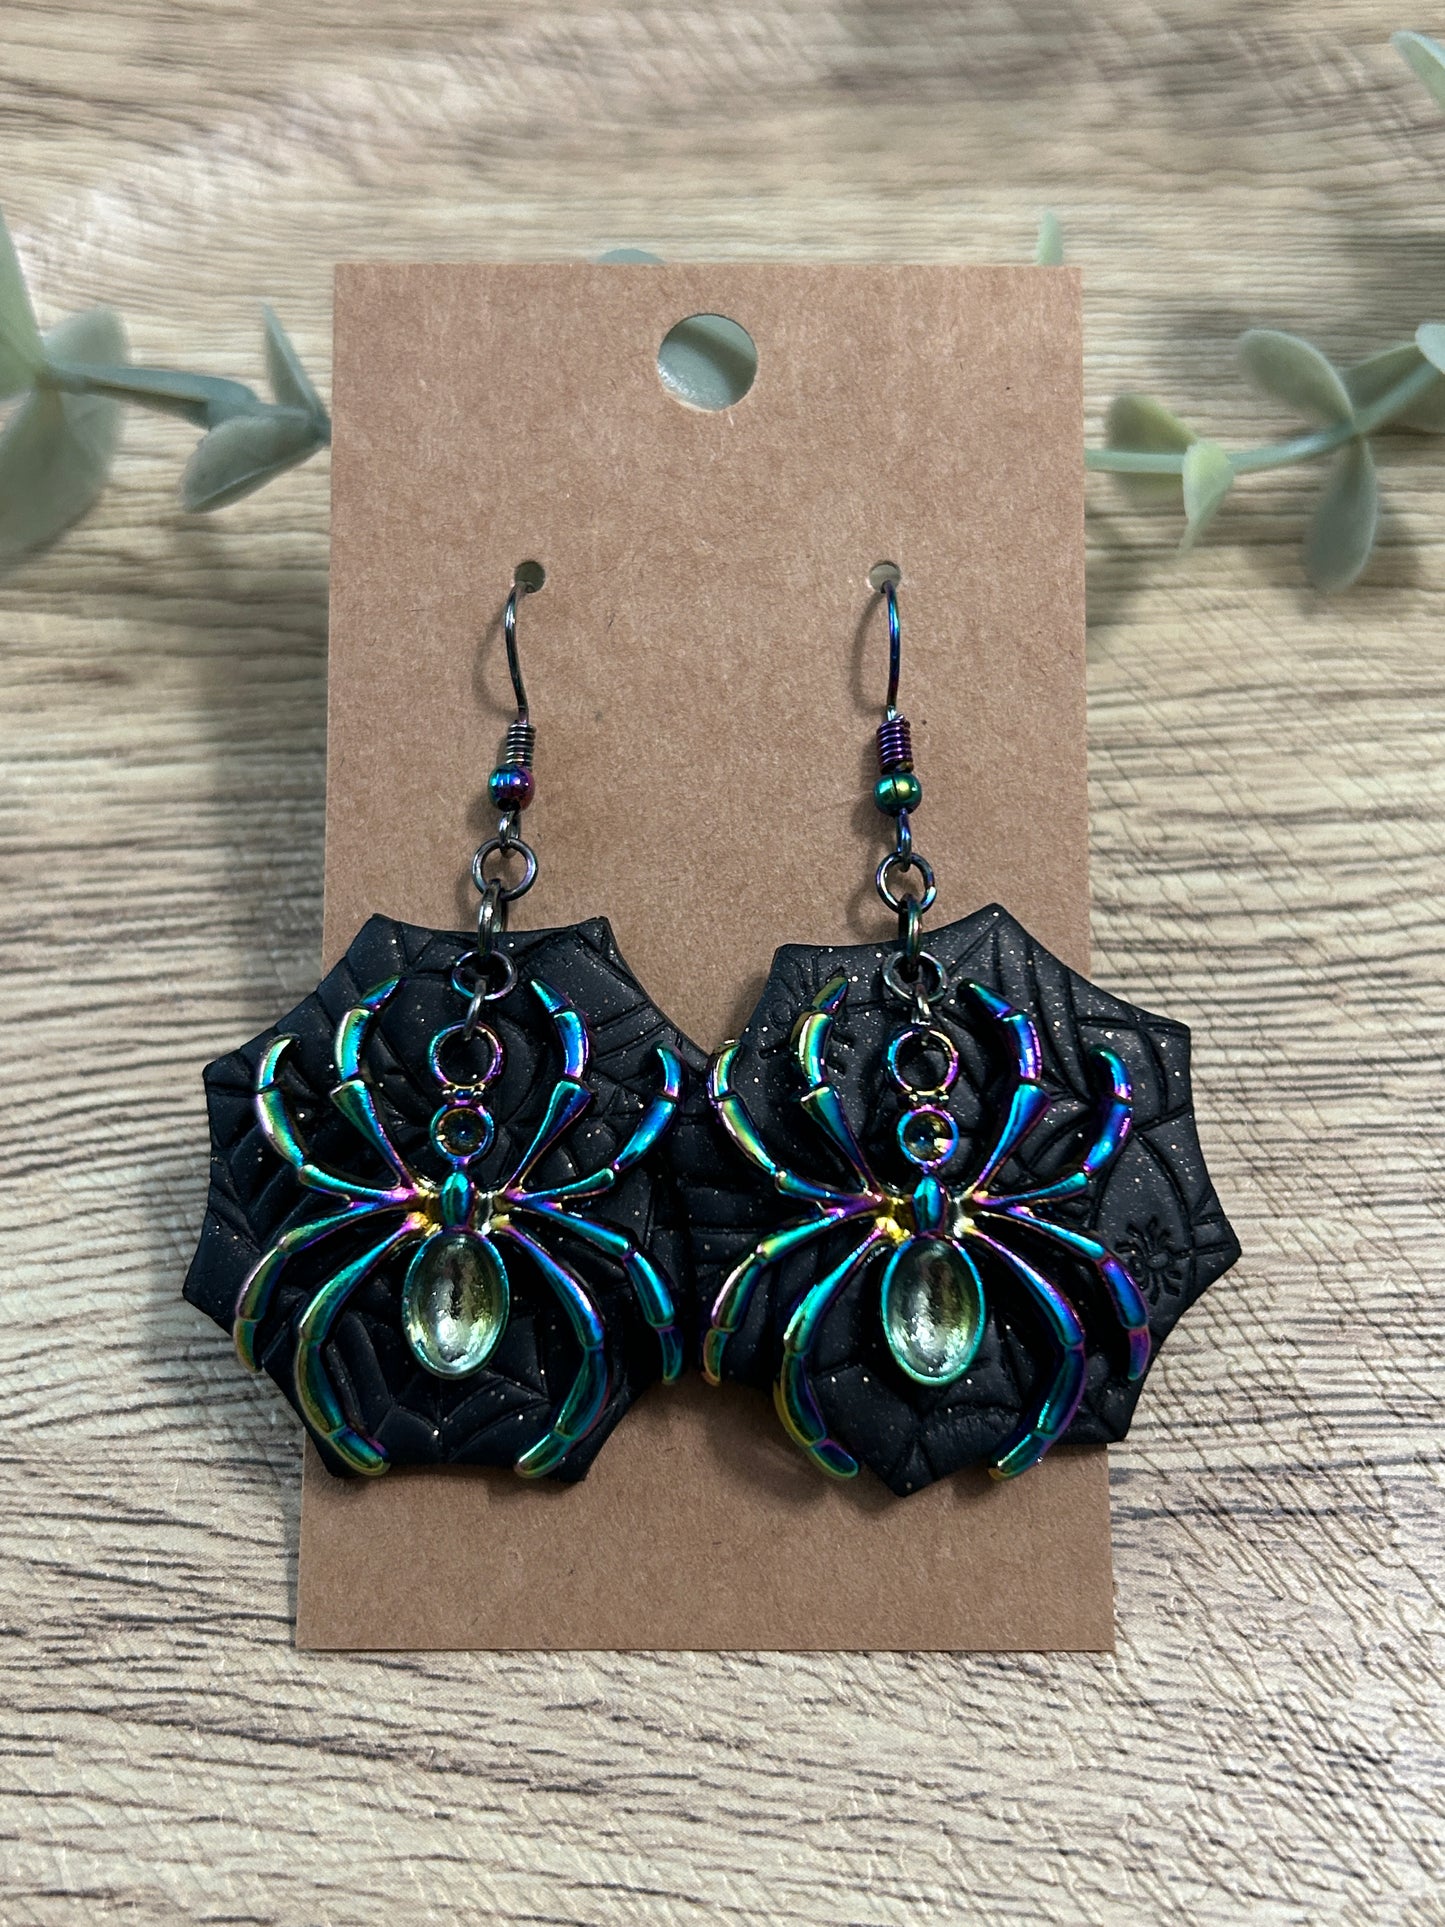 Black Rainbow Spider and Web Statement Dangle Earrings YOU CHOOSE From 4 Colors